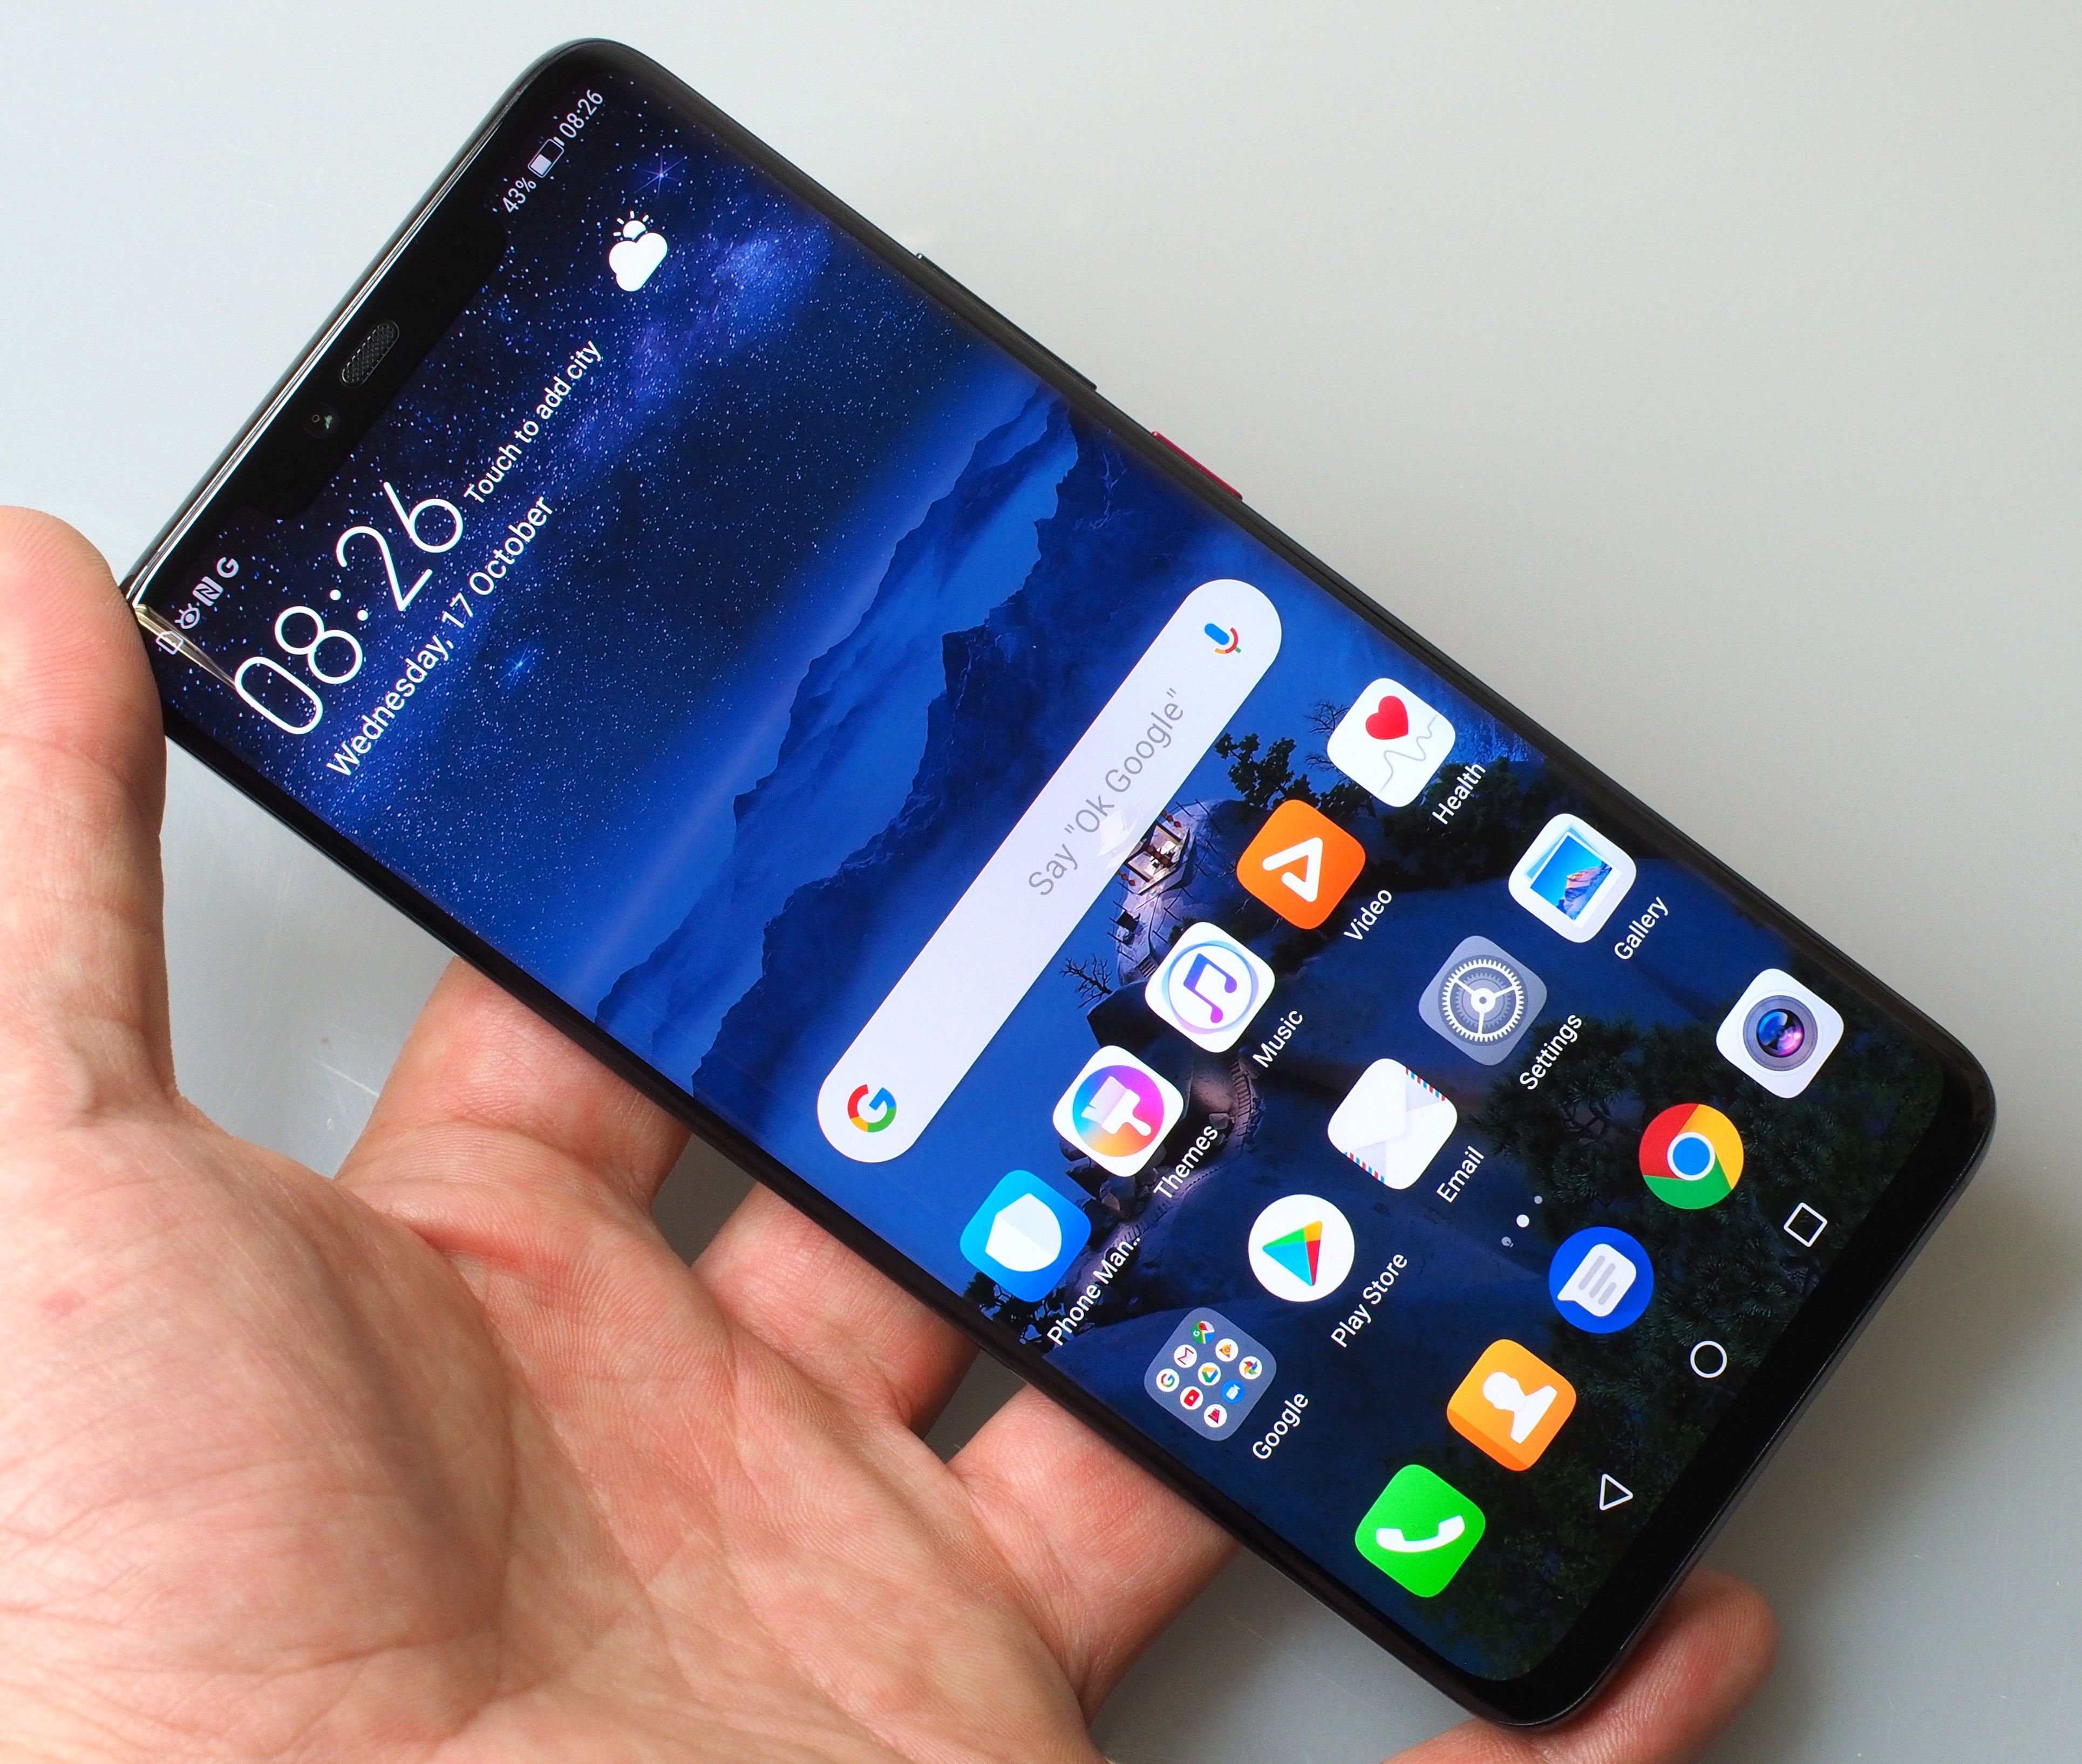 Review] Huawei Mate 50 Pro features, camera, specs, price